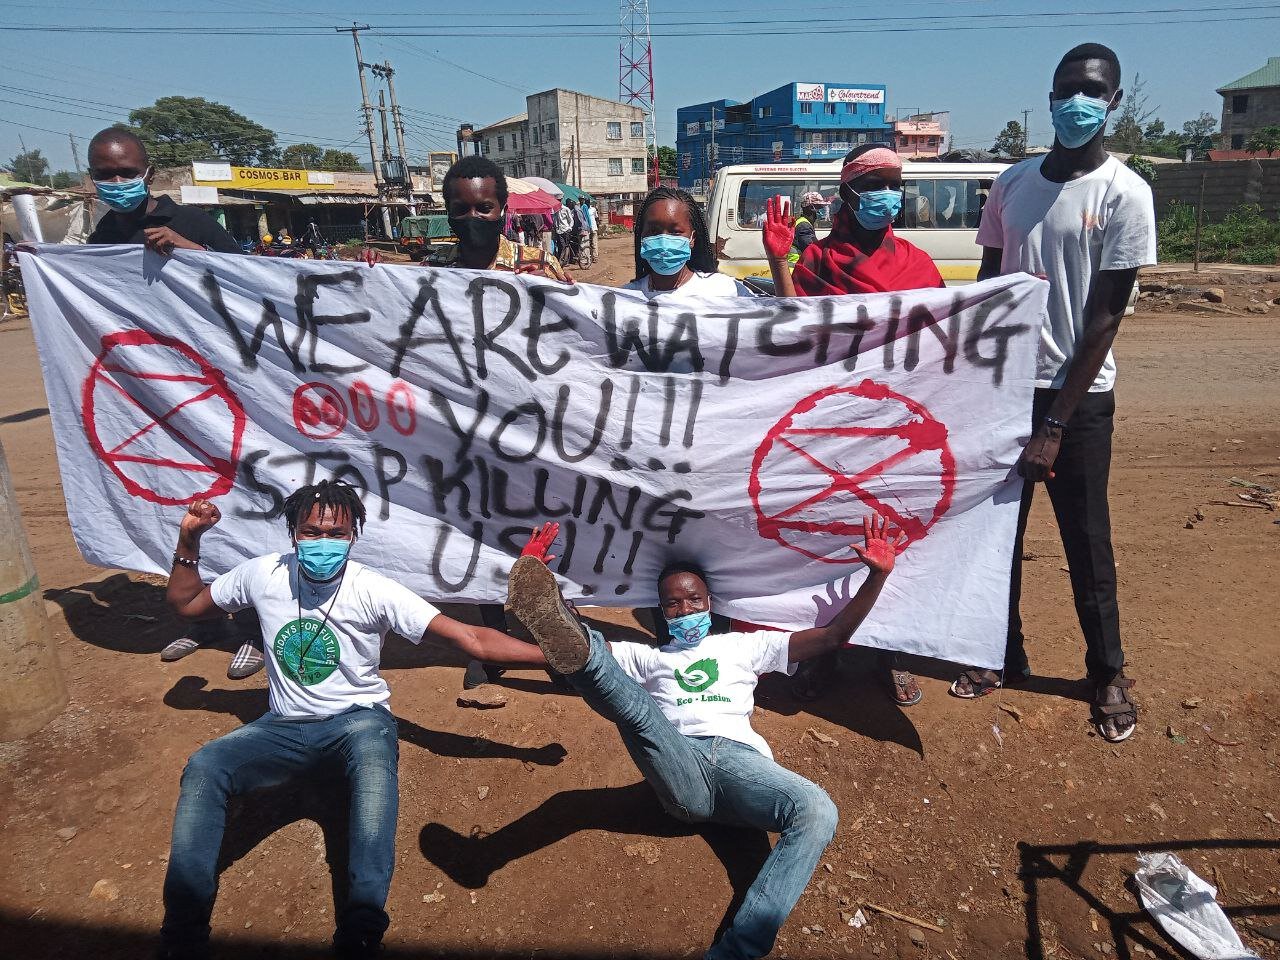 A group of XR Kisumu rebels hold a sign reading “We are watching you!!! Stop killing us!!!” Two rebels lie on the ground in front of the sign, one with his hands painted red.